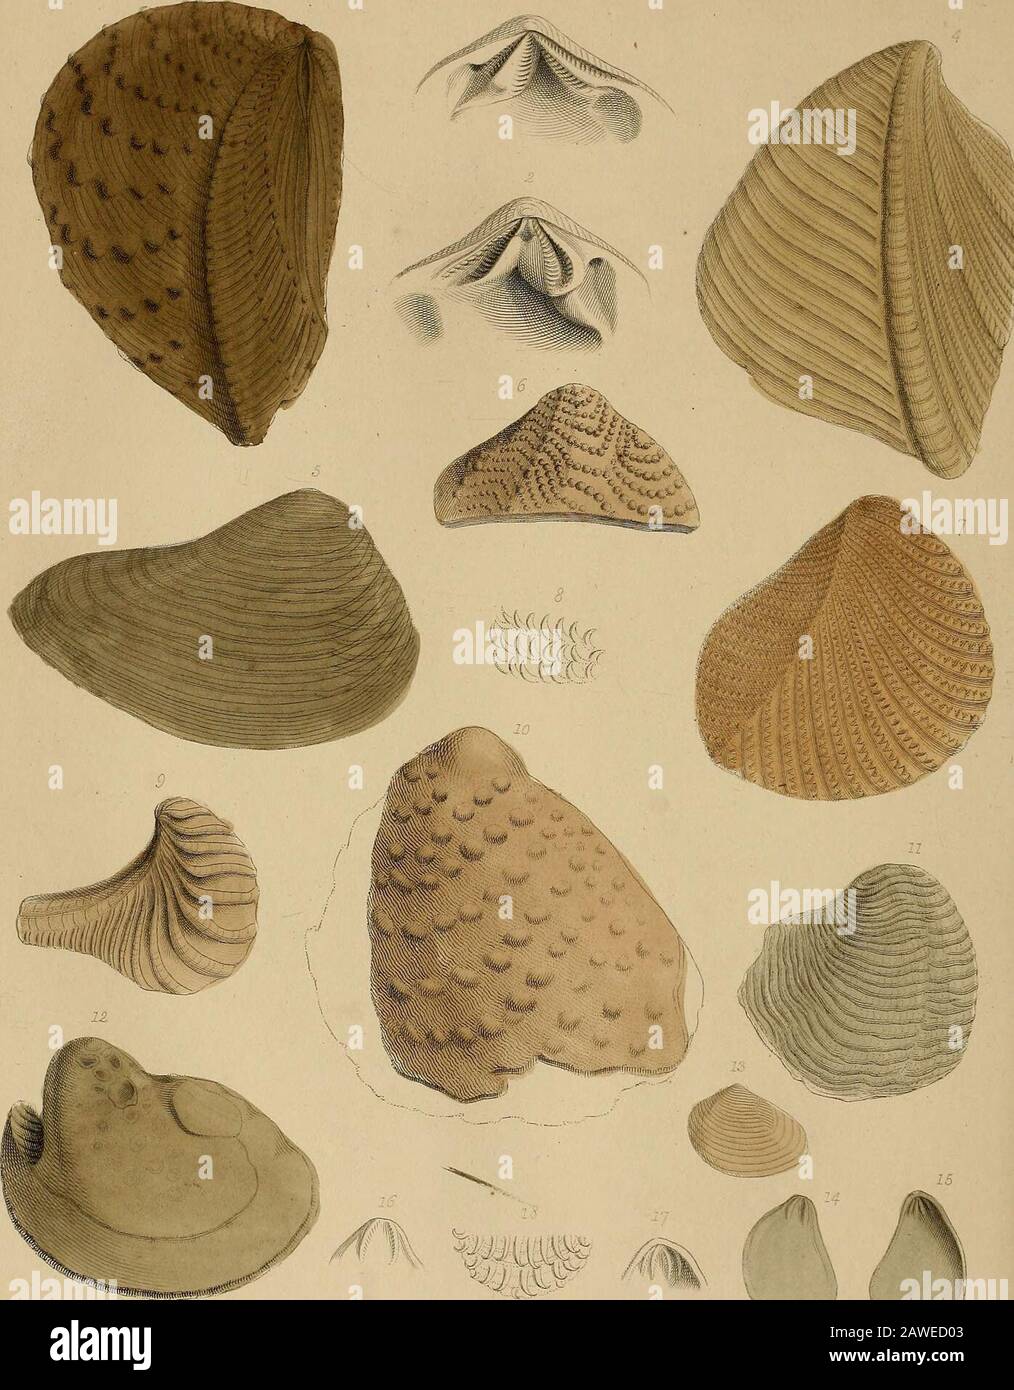 A pictorial atlas of fossil remains, consisting of coloured illustrations selected from Parkinson's 'Organic remains of a former world,' and Artis's 'Antediluvian phytology.' . calcareous deposits now in progress offormation in our lakes. In the lacustrine limestones of the Isle of Wight (atBinstead, White Cliflf, &c.), beautiful specimens may be obtained. ProfessorE. Forbes has discovered Gyrogonites in the Wealden strata of the Isle of Purbeck,associated with shells of the genera Planorbis, Physa, Paluolina, &c. See Geological Excursions round the Isle of Wight. 2d Edit. 1850, p. 108. 144 rO Stock Photo